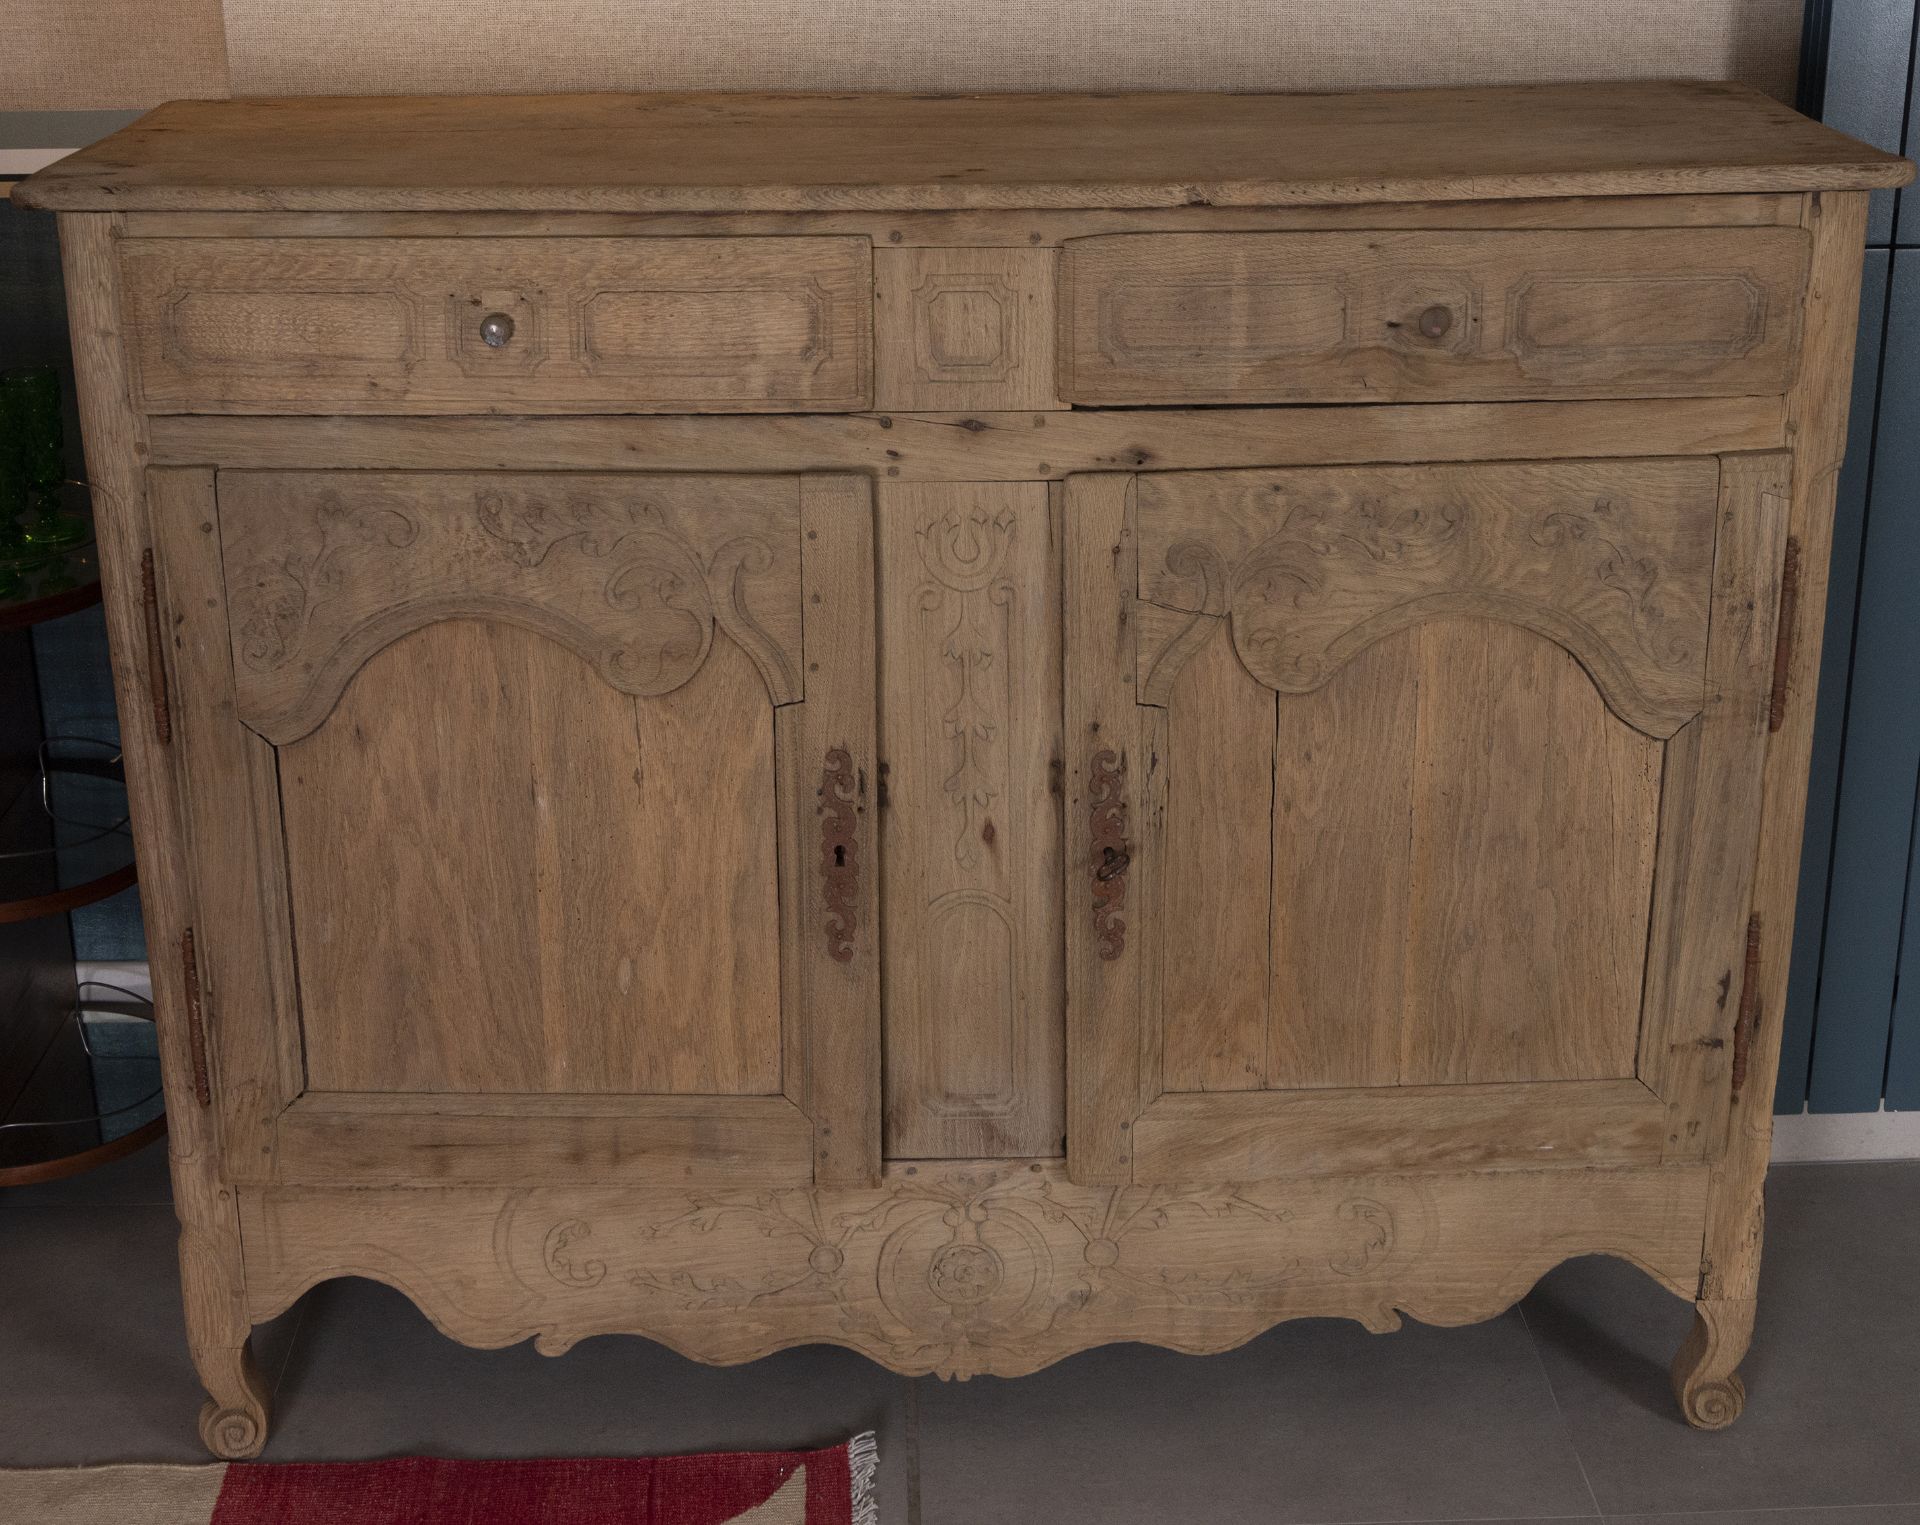 Provençal entredos chest of drawers from the 18th century, in wood in its color